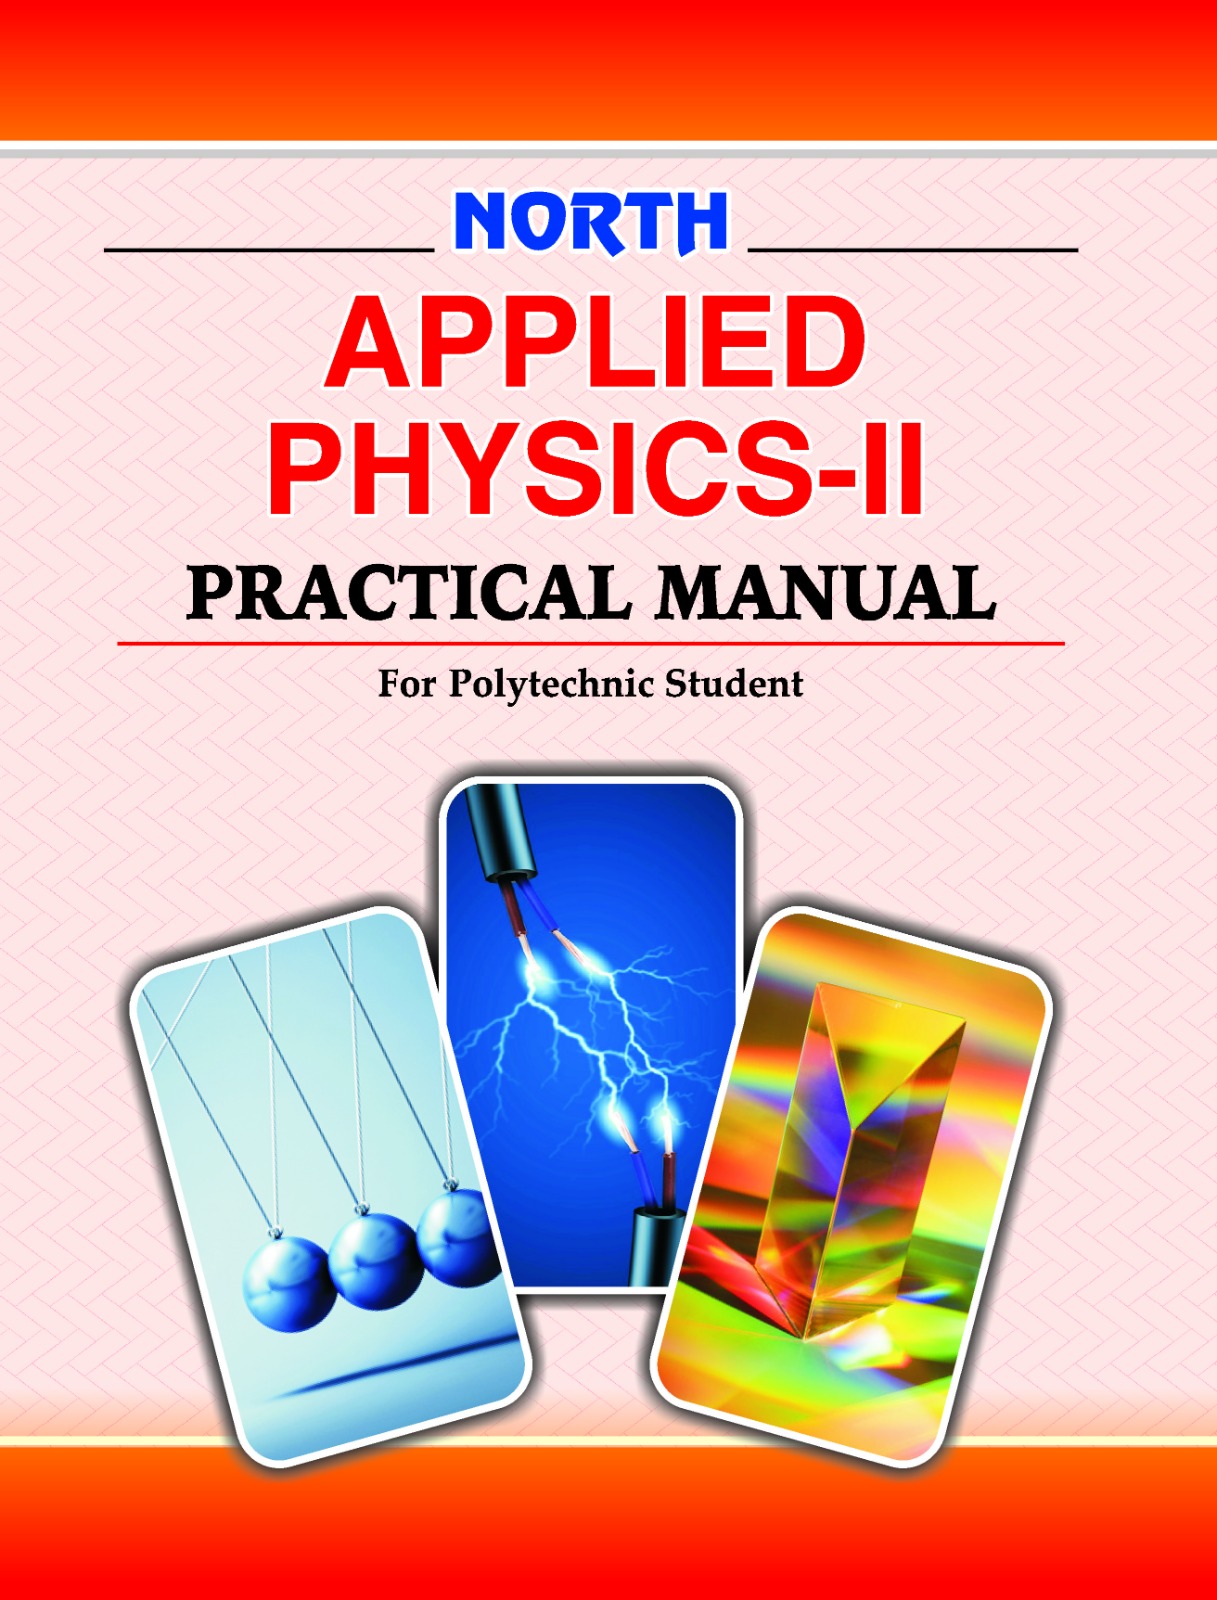 Applied Physics-II
Practical Manual